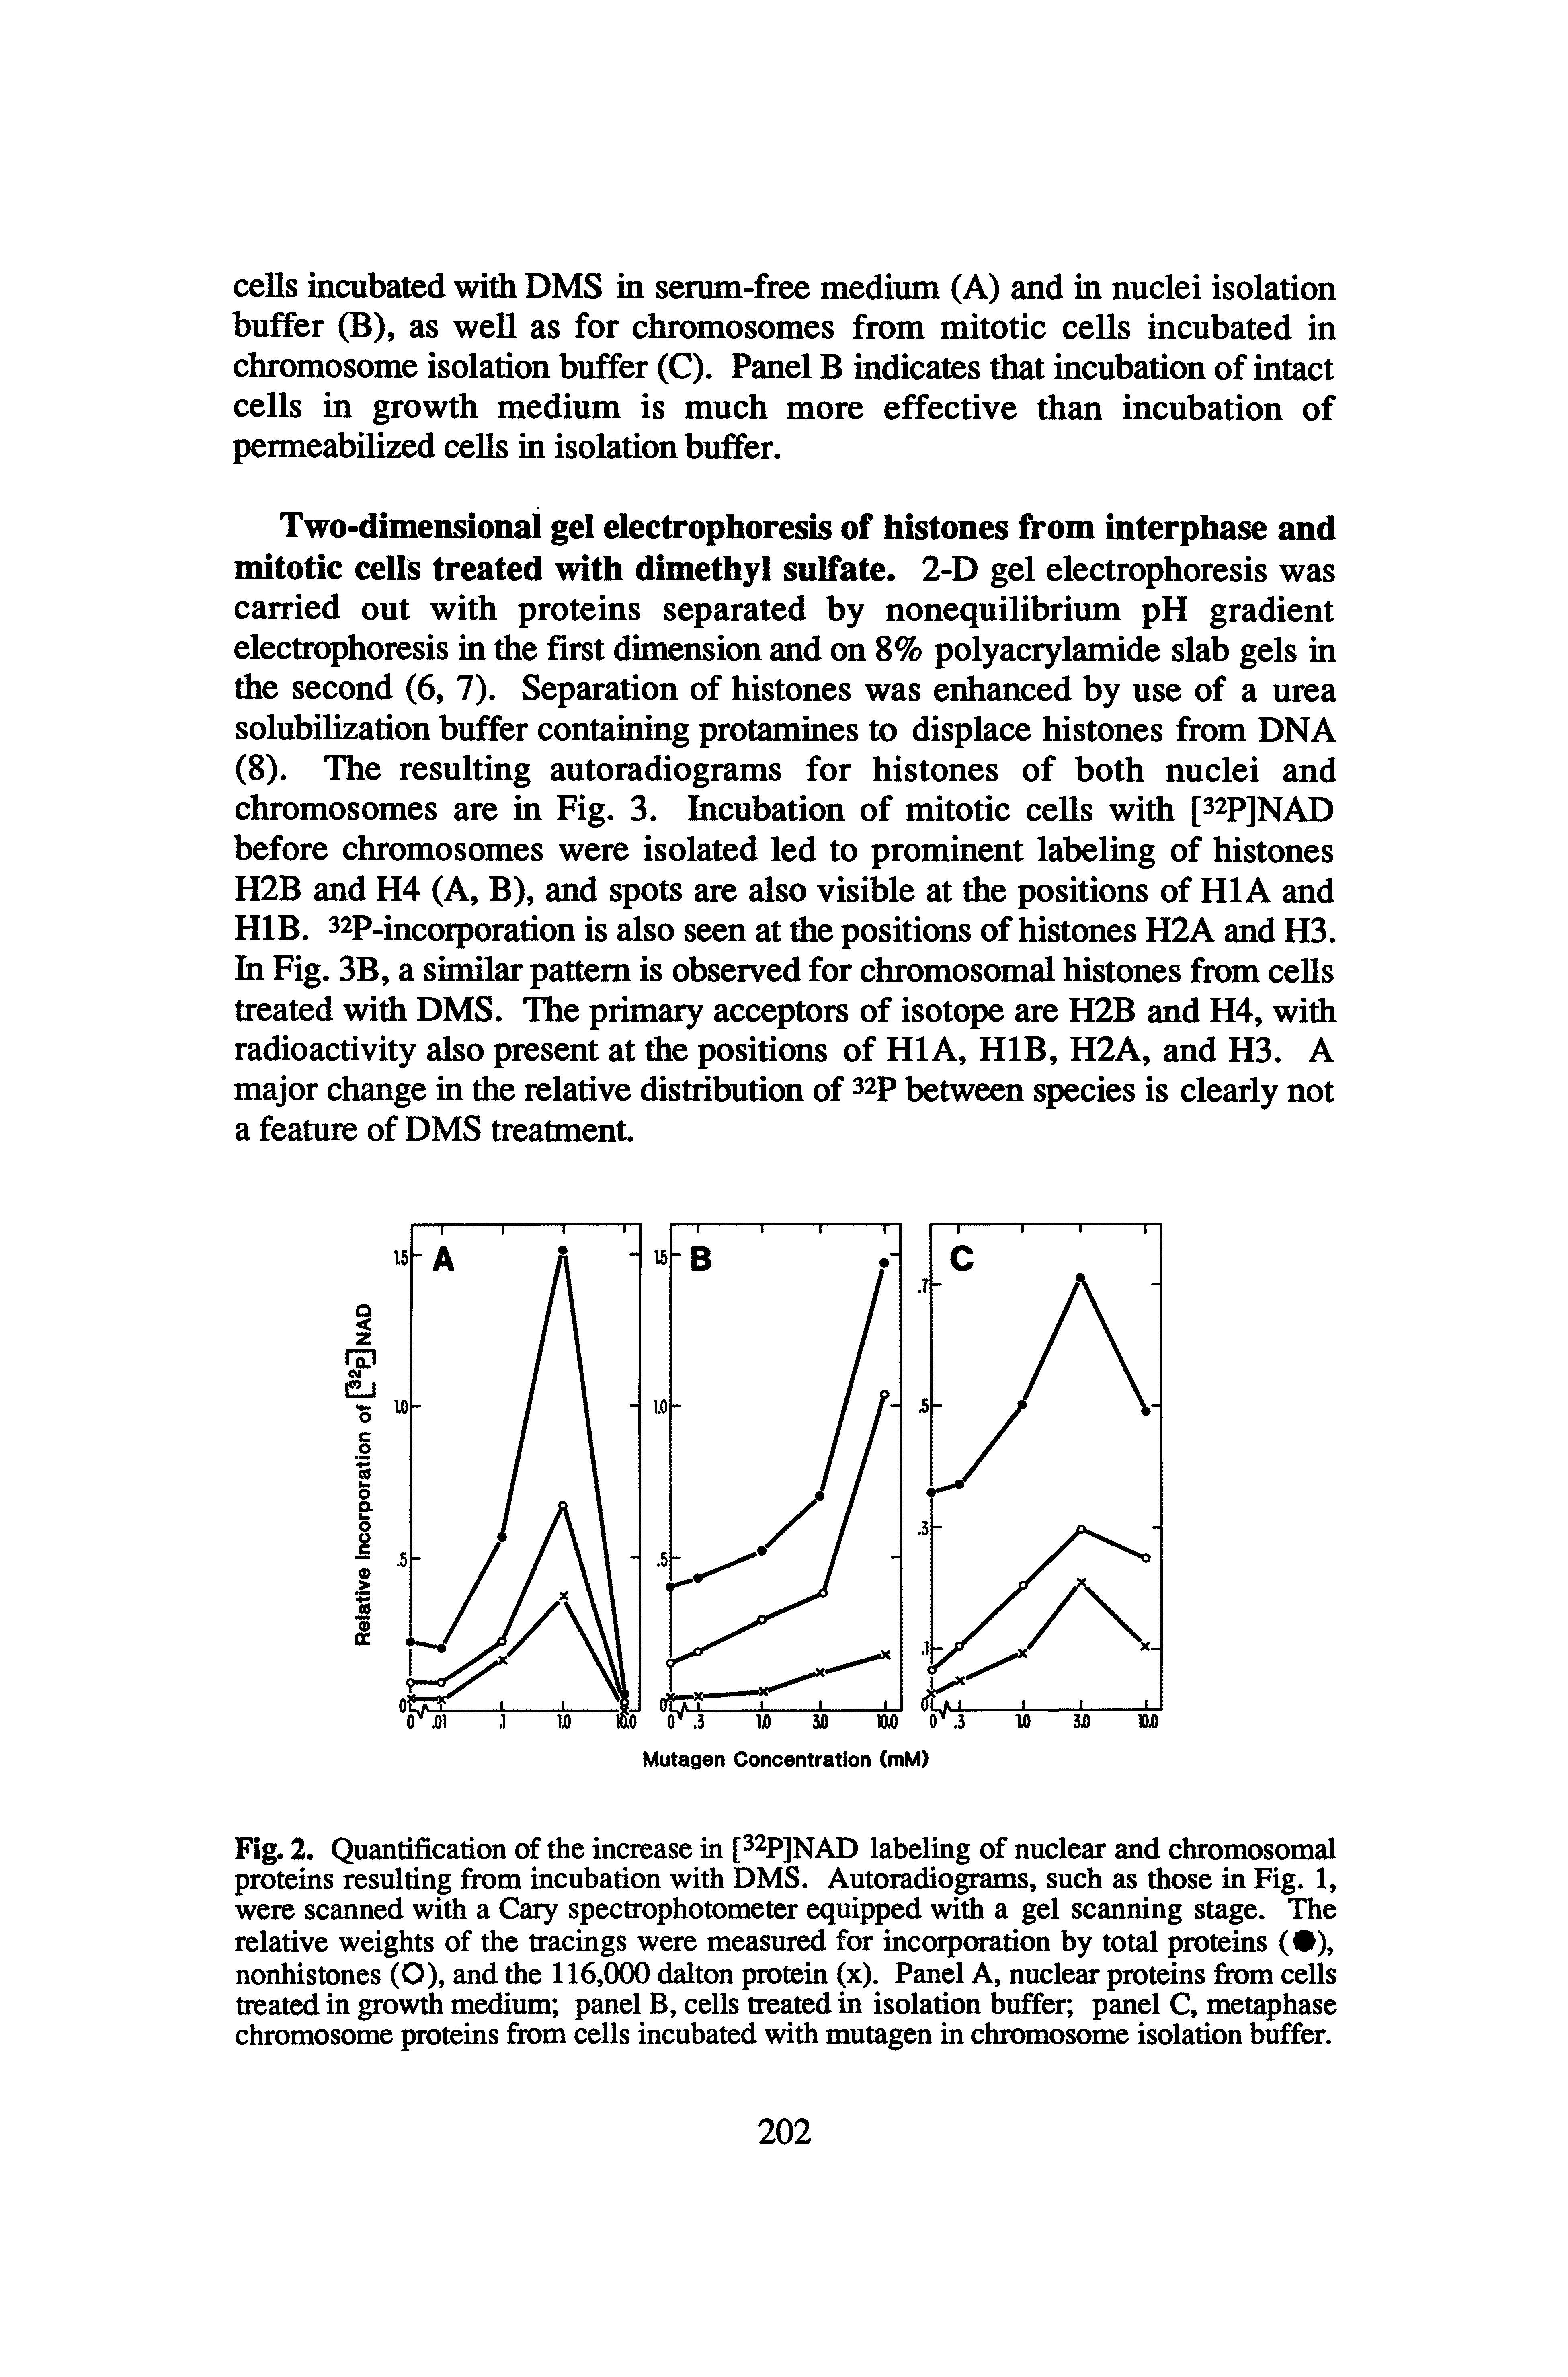 Fig. 2. Quantification of the increase in t PJNAD labeling of nuclear and chromosomal proteins resulting from incubation with DMS. Autoradiograms, such as those in Fig. 1, were scanned with a Cary spectrophotometer equipped with a gel scanning stage. The relative weights of the tracings were measured for incorporation by total proteins ( ), nonhistones (O), and the 116,000 dalton protein (x). Panel A, nuclear proteins from cells treated in growth medium panel B, cells treated in isolation buffer, panel C, metaphase chromosome proteins from cells incubated with mutagen in chromosome isolation buffer.